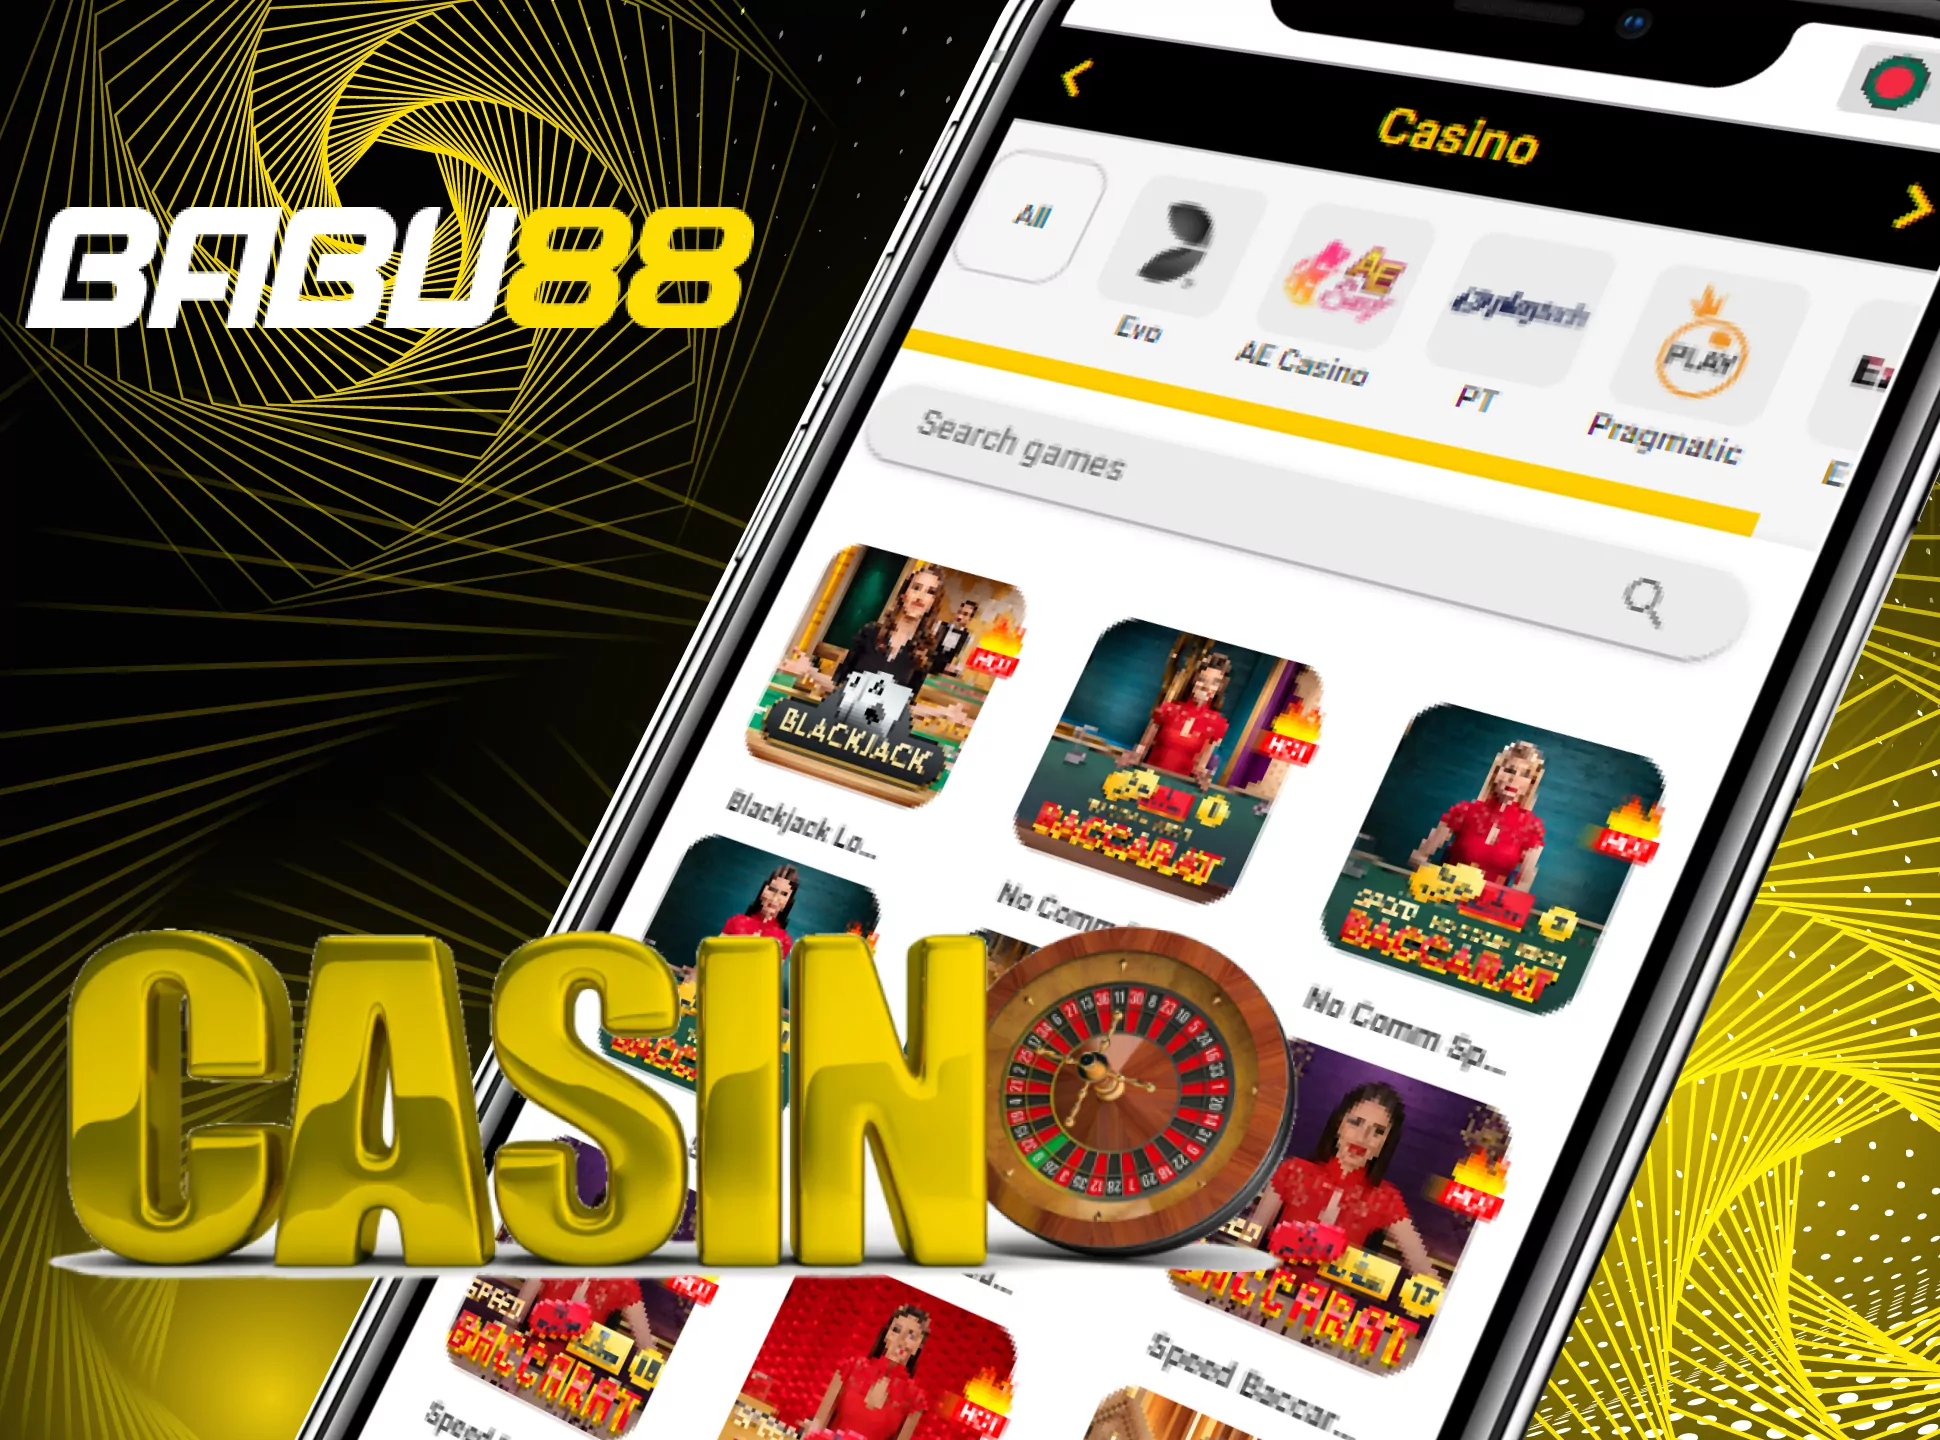 You can also play casino games in the Babu88 app.